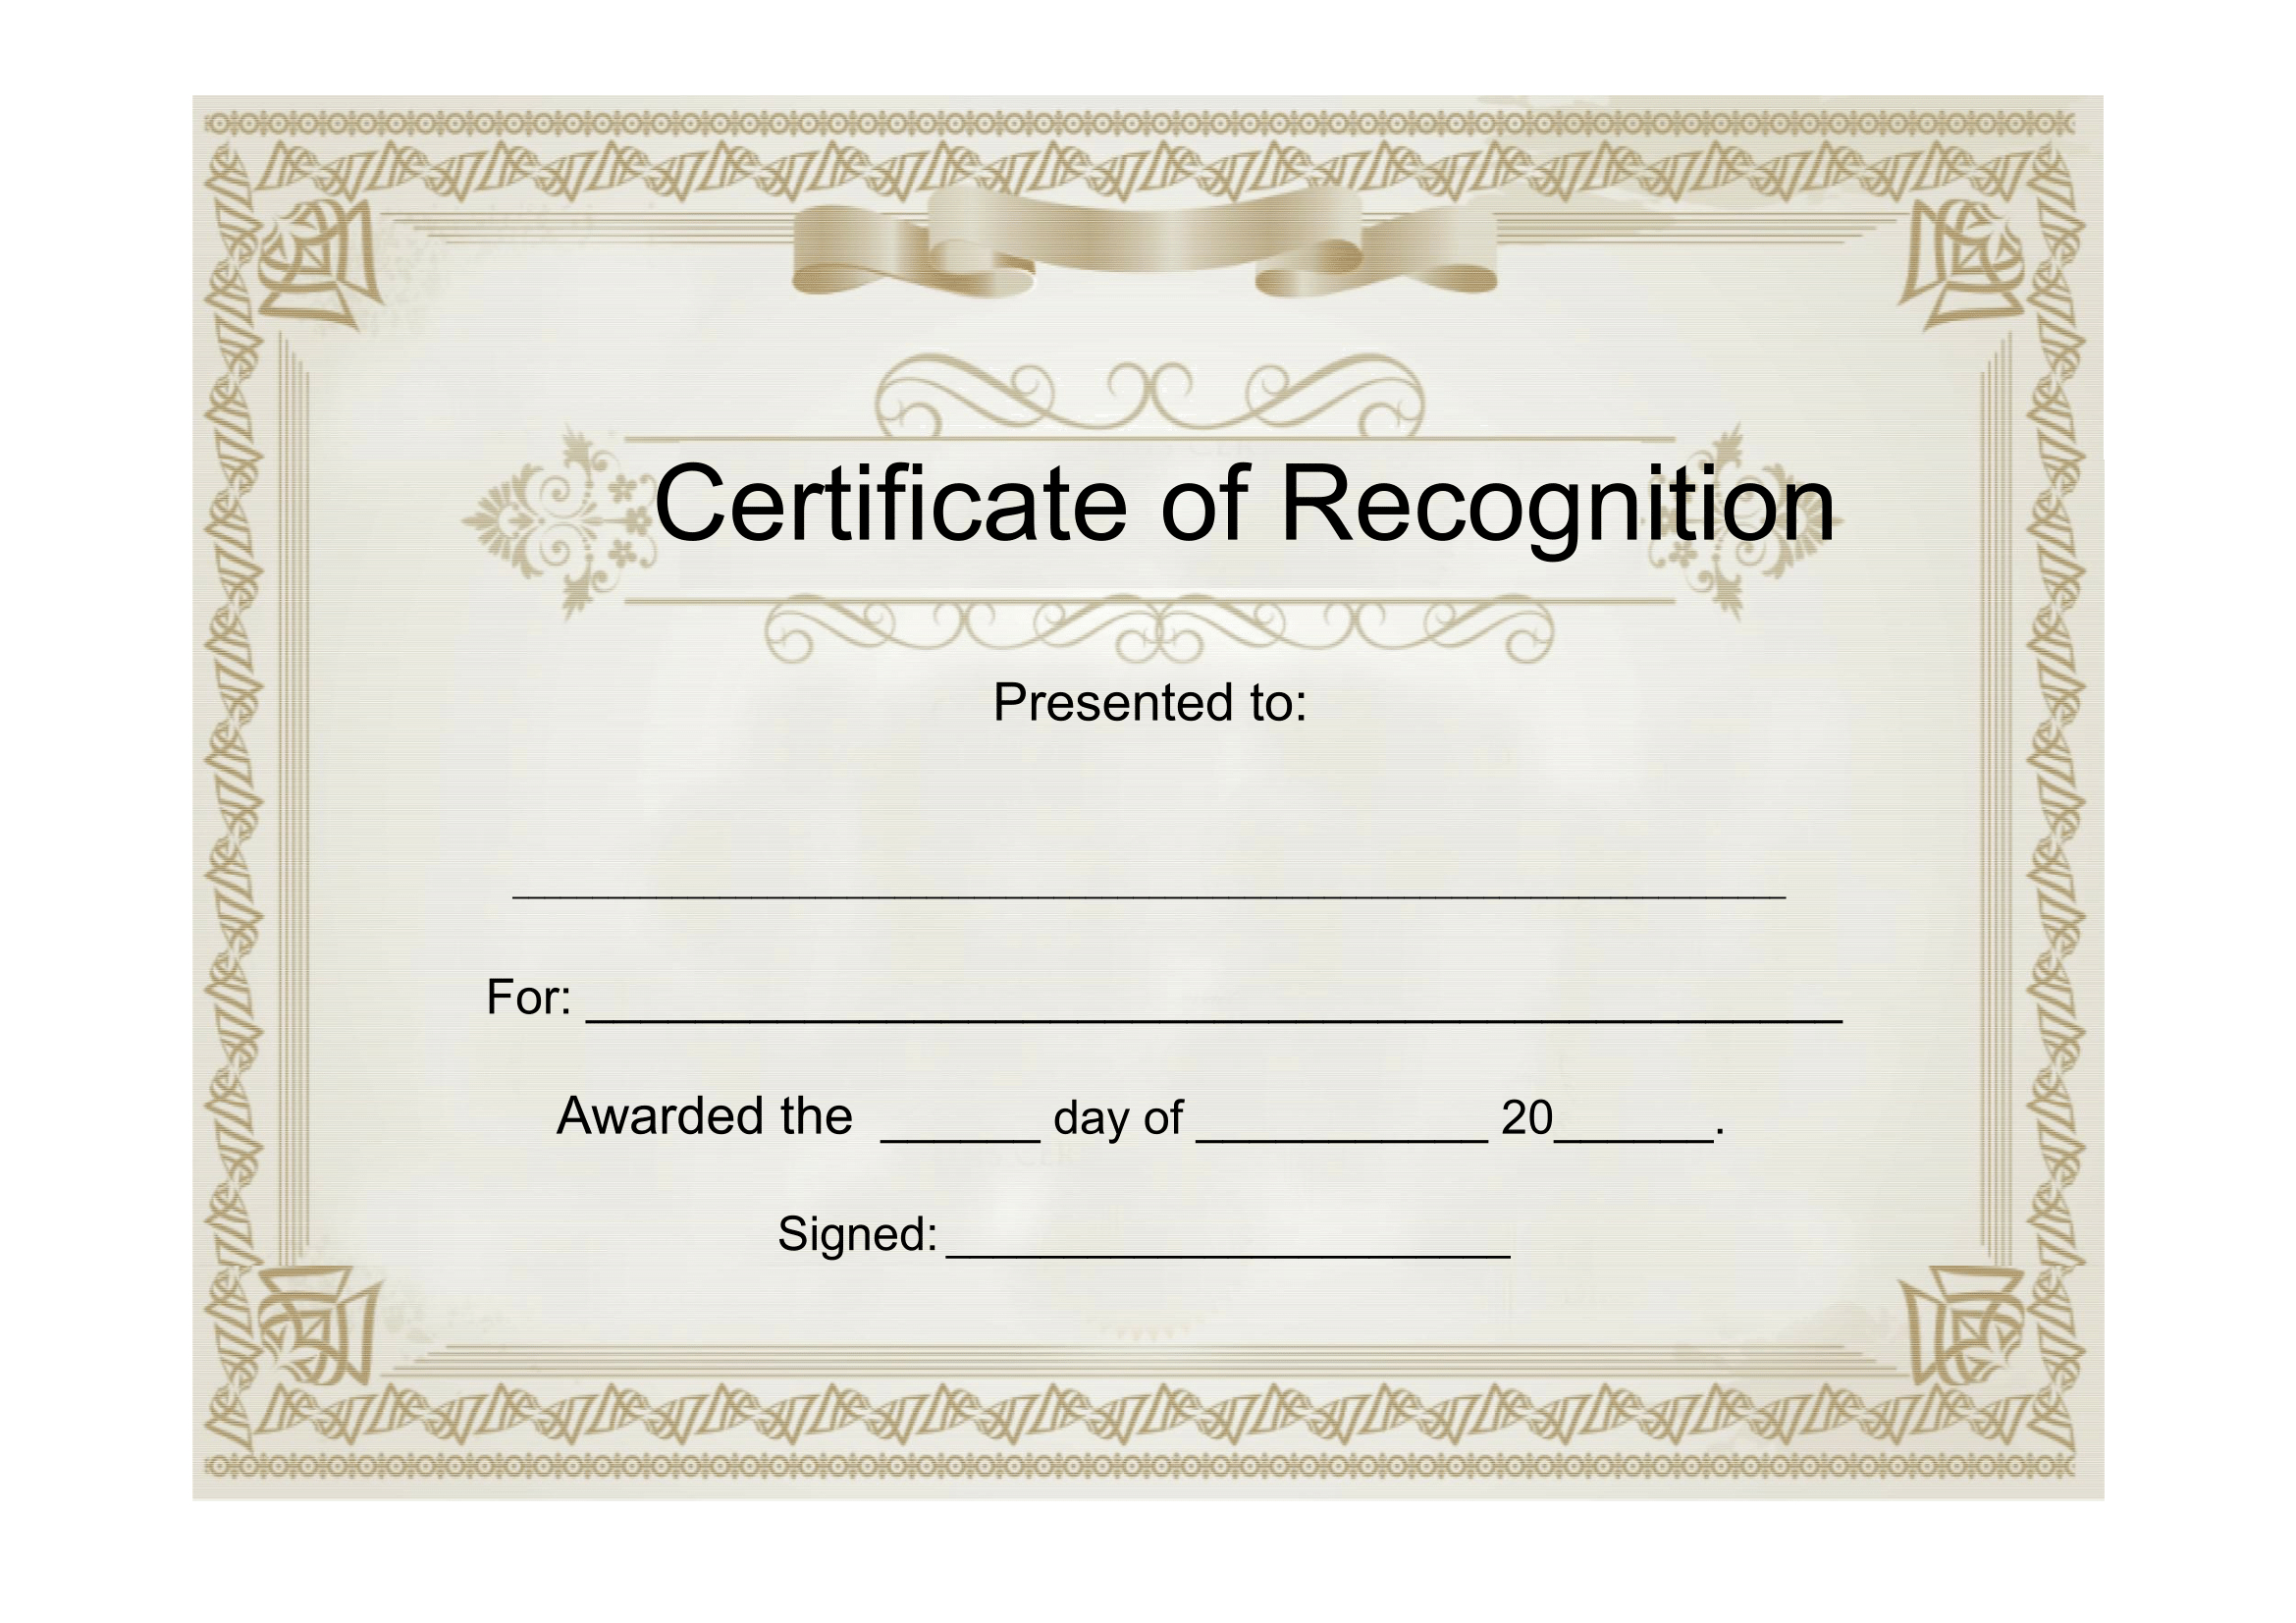 Sample Certificate Of Recognition – Free Download Template Within Sample Certificate Of Recognition Template